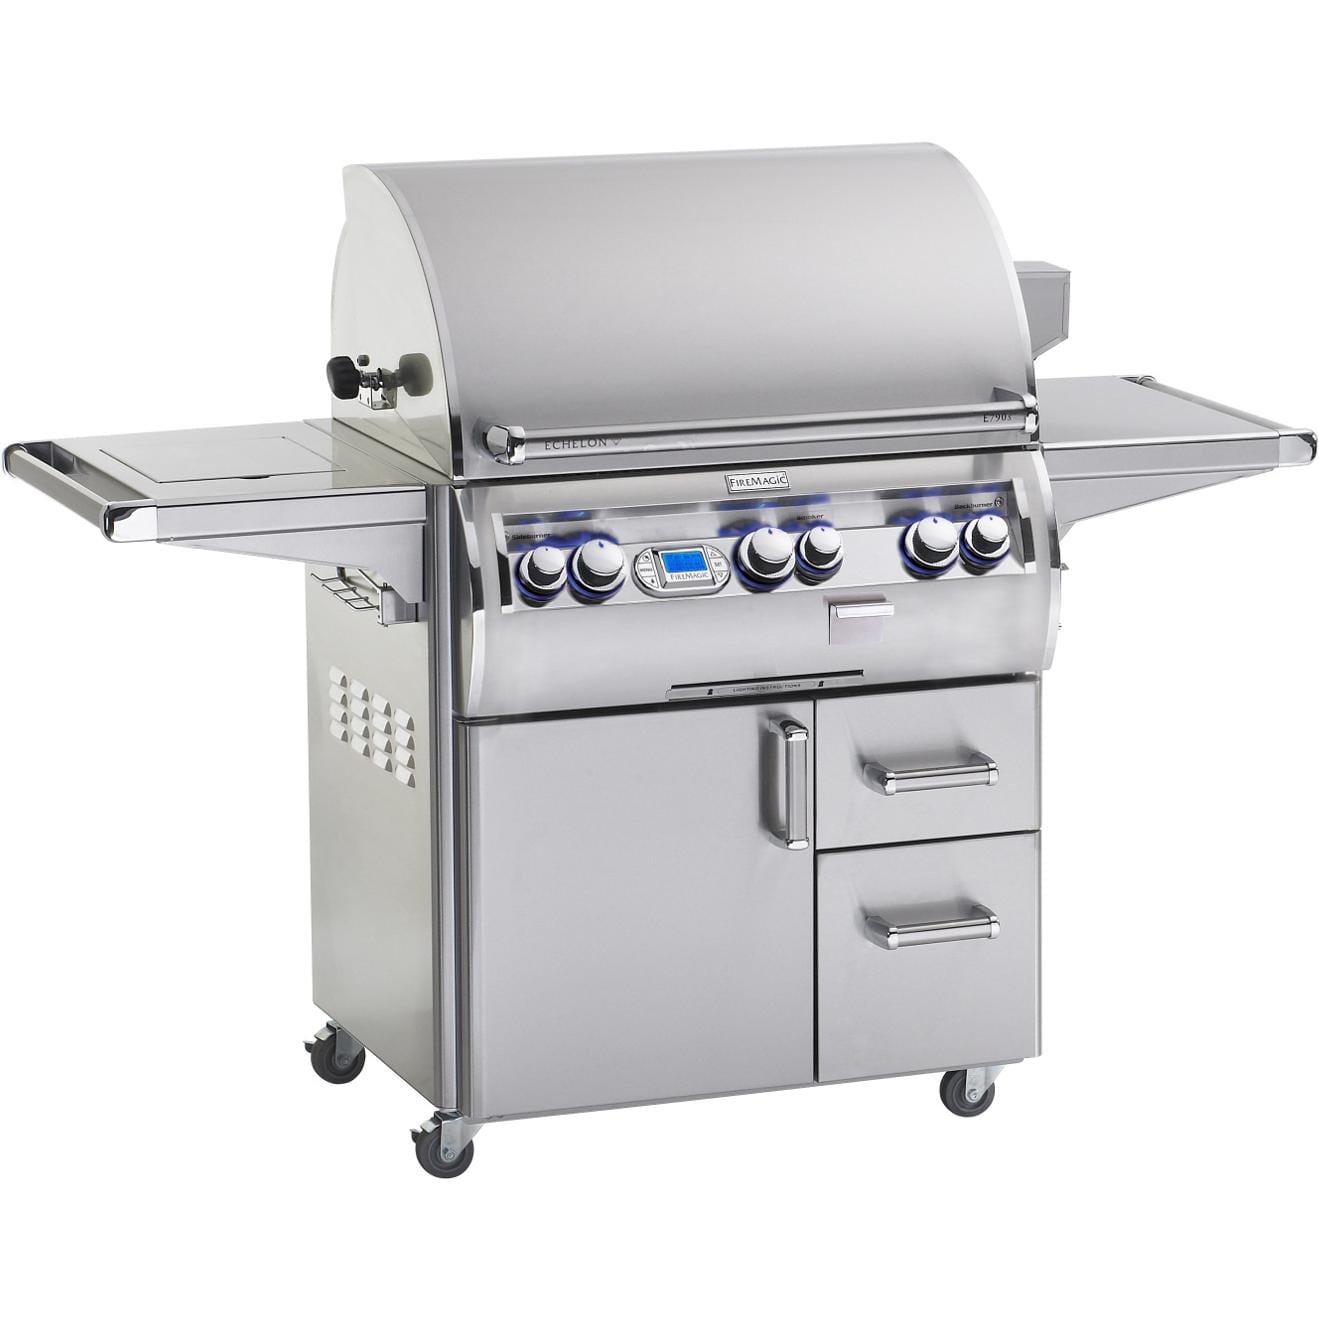 Fire Magic - Aurora A660s 30-Inch Propane Gas Freestanding Grill w/ Flush Mounted Single Side Burner, Backburner, Rotisserie Kit and Analog Thermometer - A660S-8EAP-62